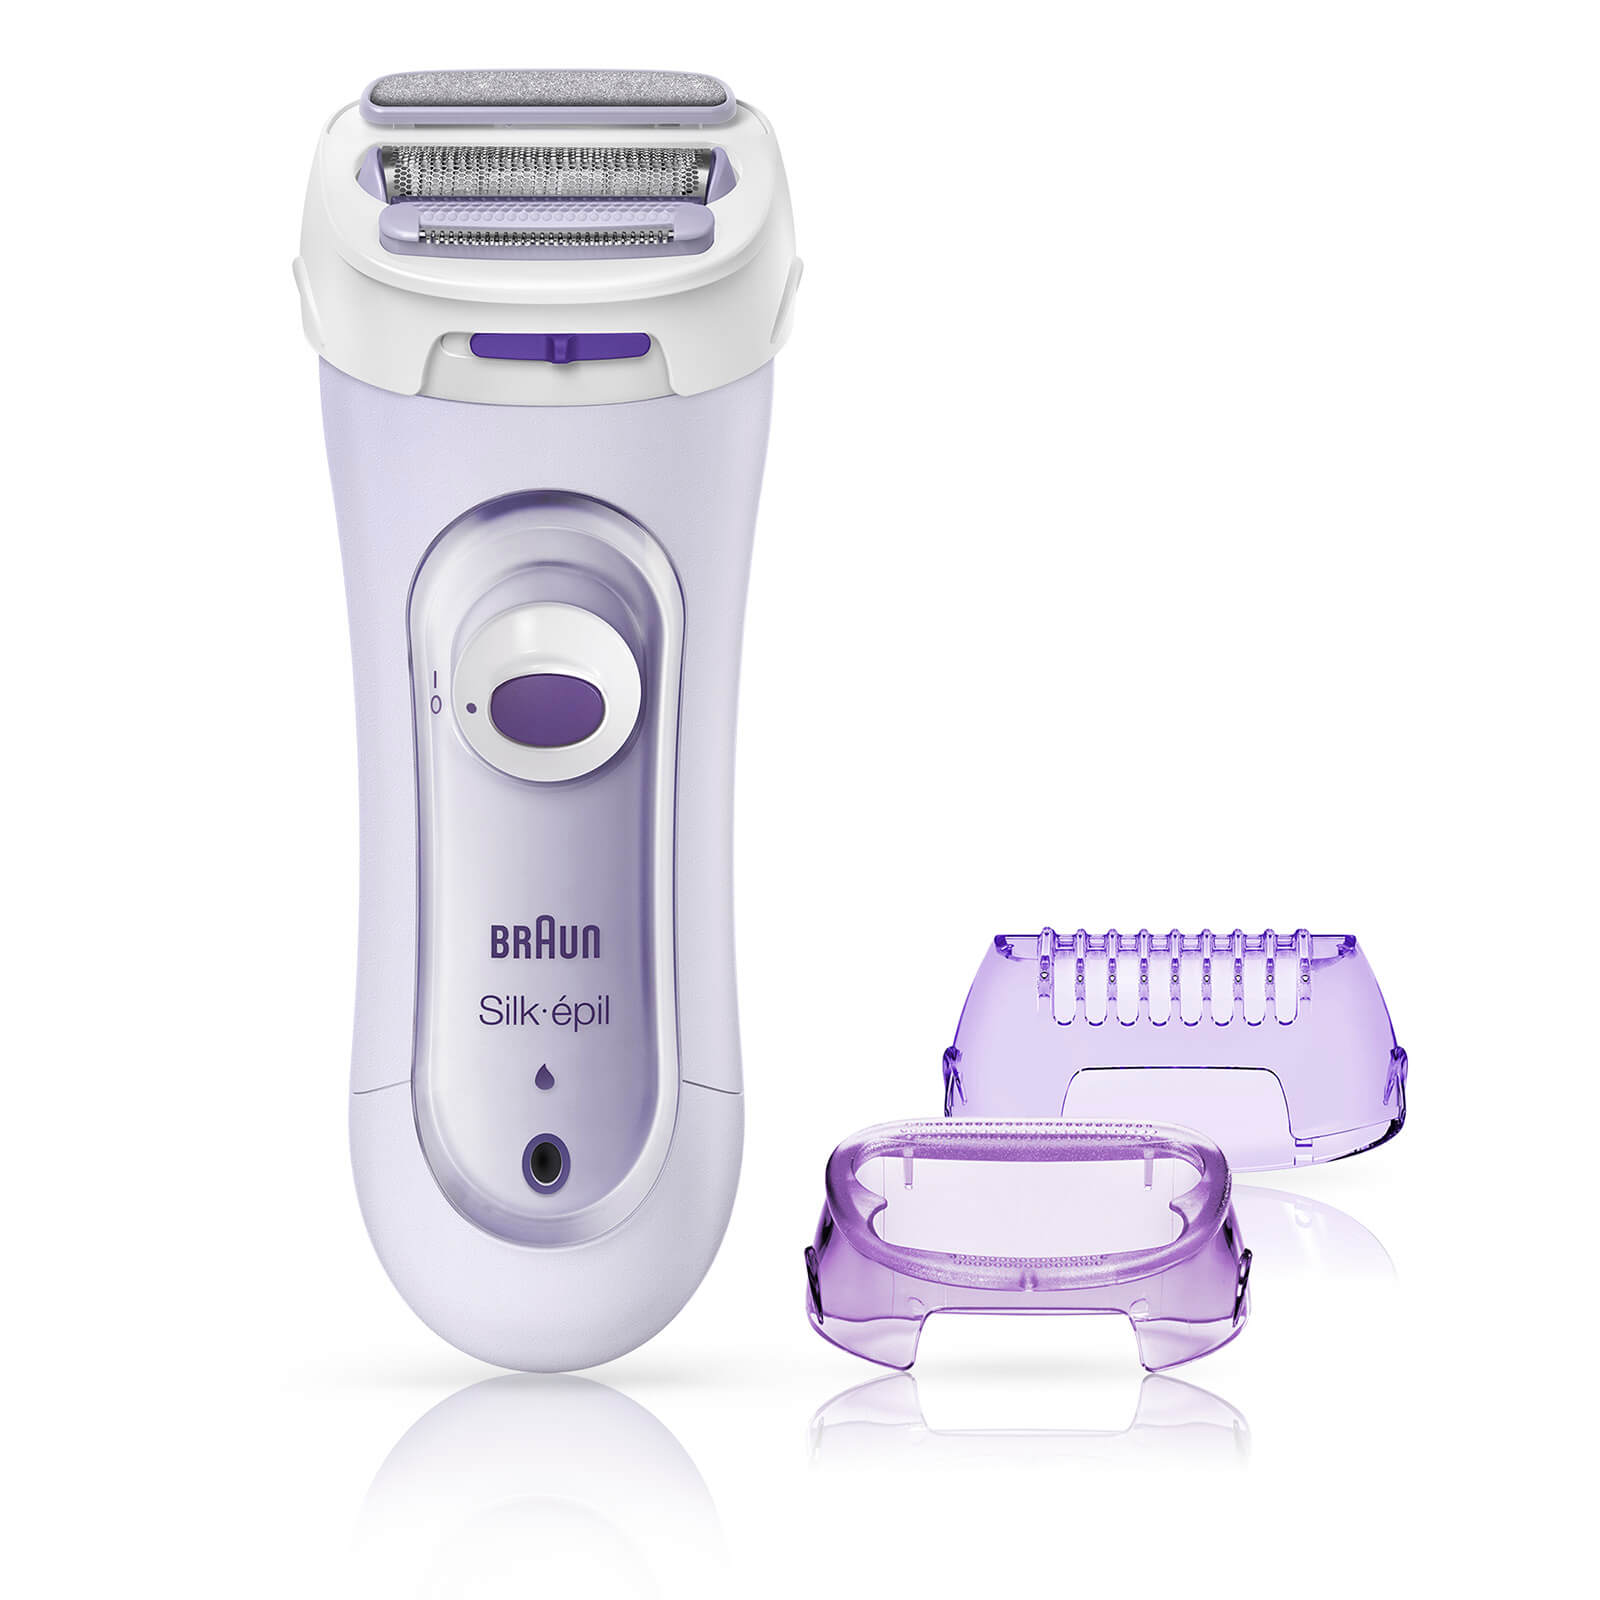 Braun Lady Shaver - 3-in-1 Cordless Electric Shaver